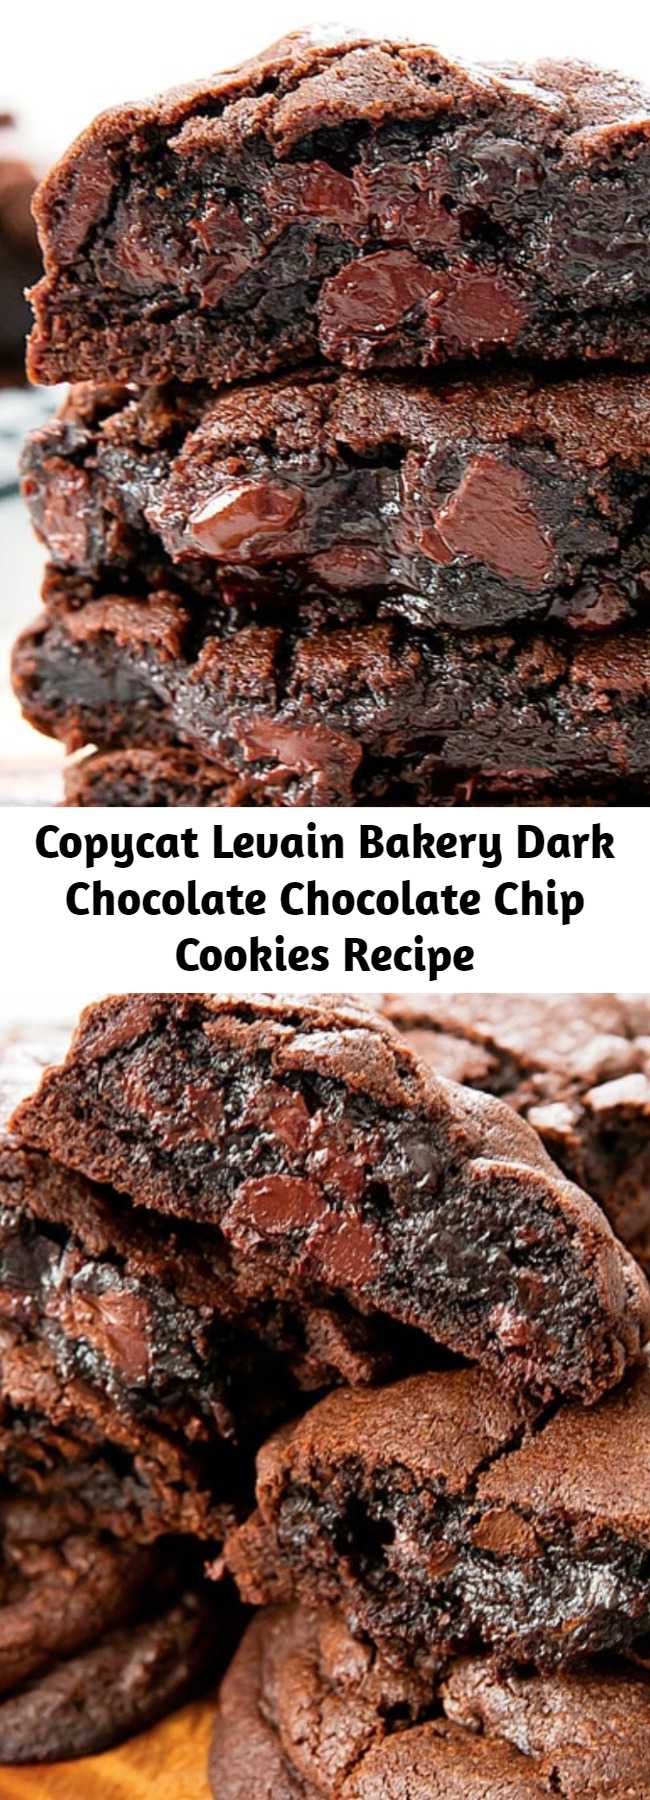 Copycat Levain Bakery Dark Chocolate Chocolate Chip Cookies Recipe - These decadent double chocolate chip cookies are thick, soft, and rich. They taste very close to the dark chocolate chocolate chip cookies from Levain Bakery in New York City.